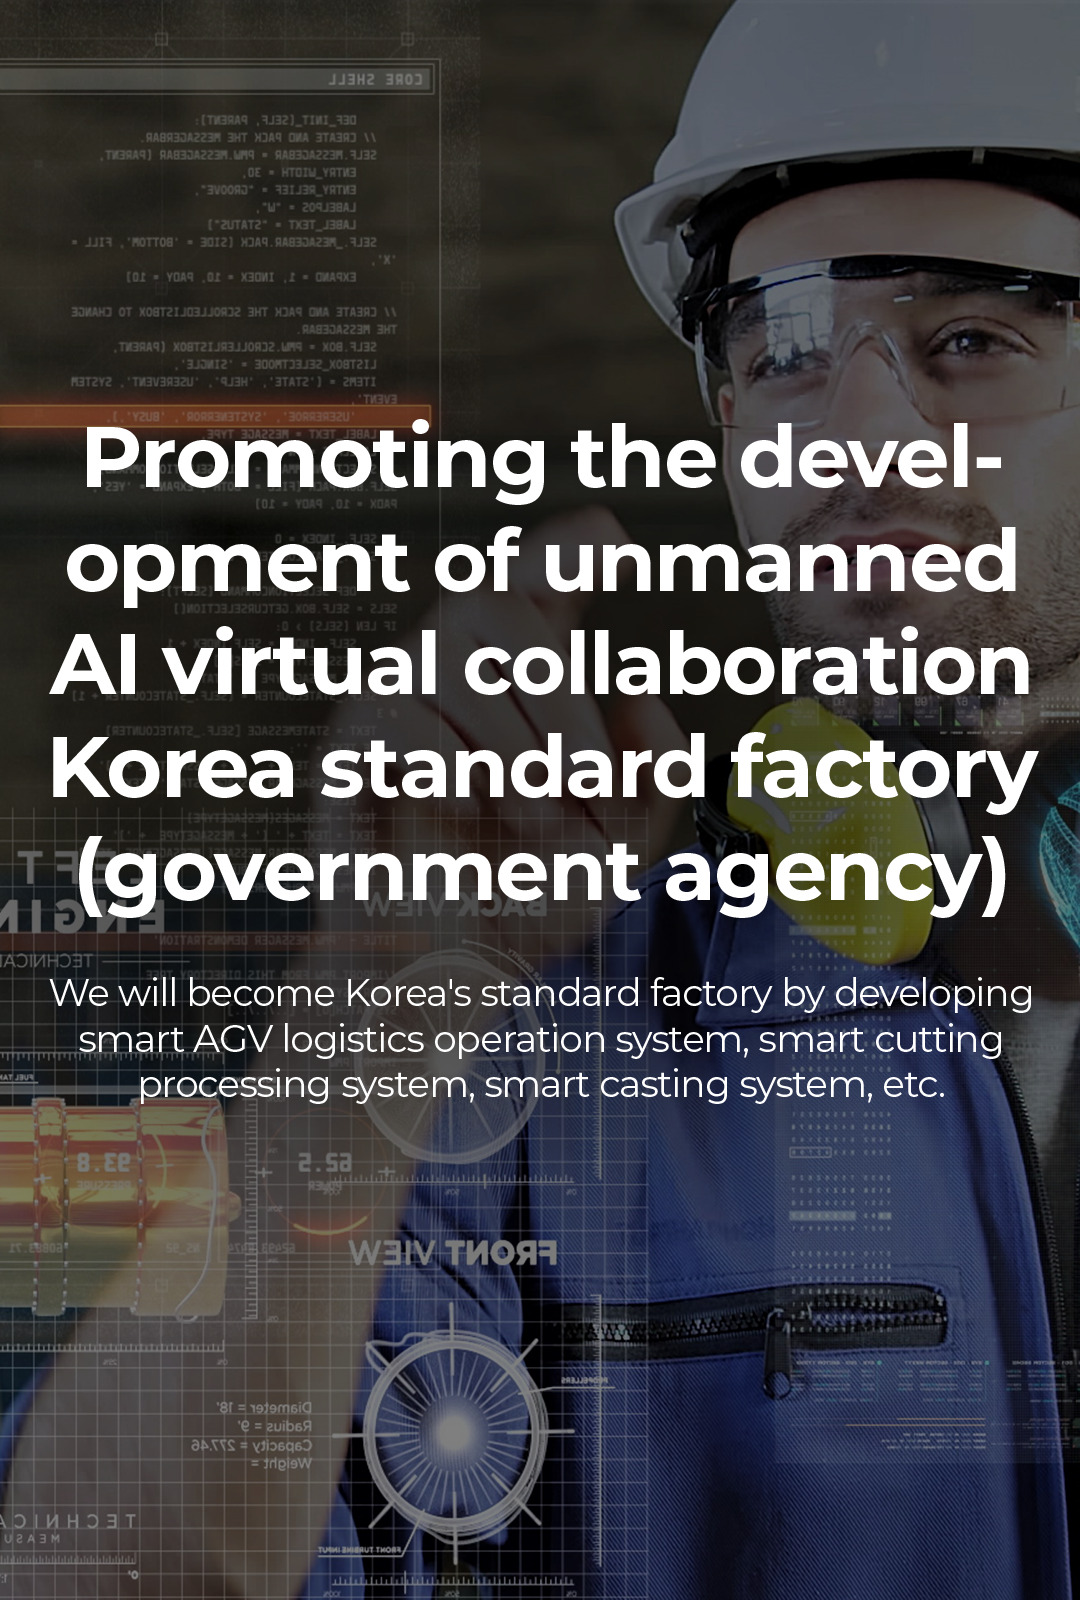 Promoting the development of unmanned AI virtual collaboration Korea standard factory (government agency)